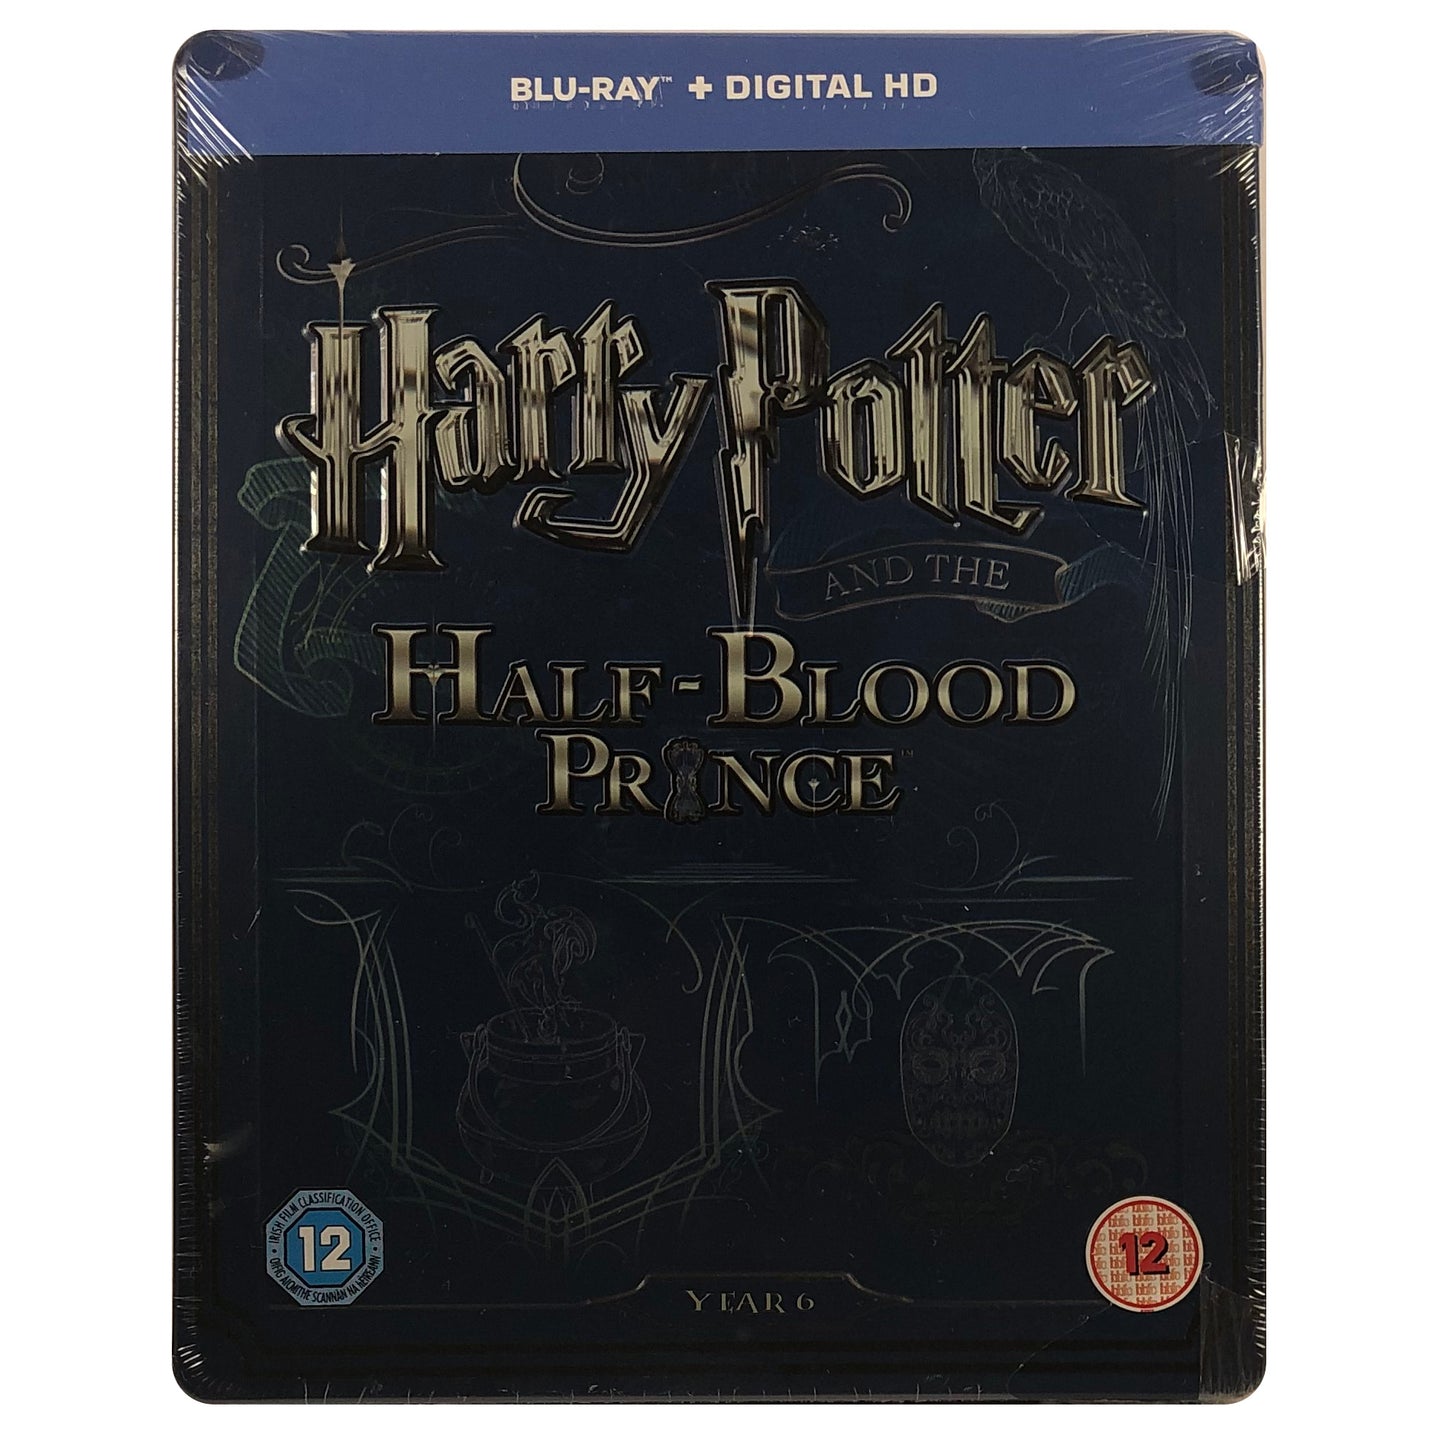 Harry Potter And The Half-Blood Prince Blu-Ray Steelbook